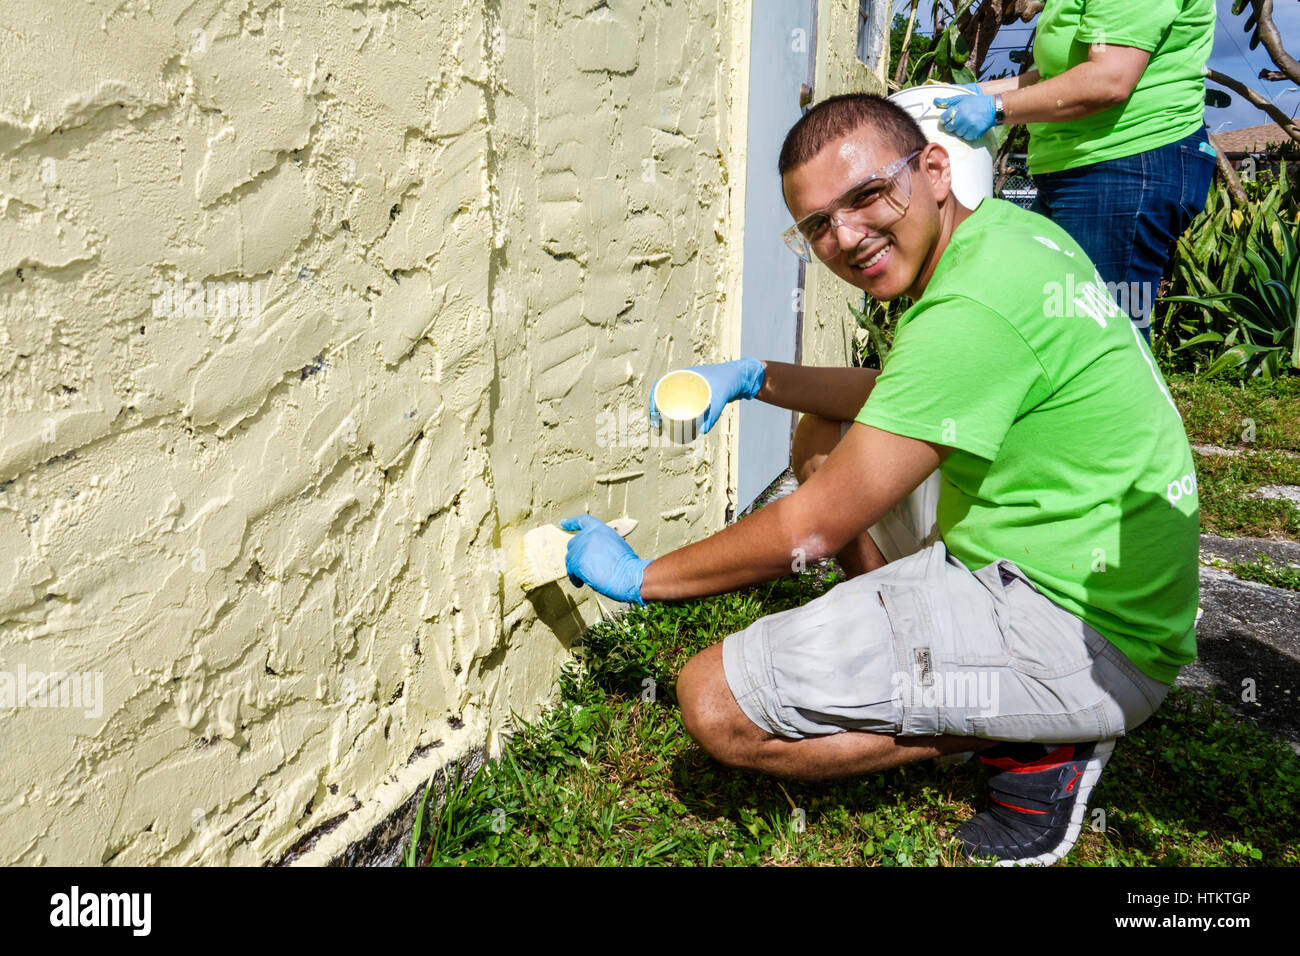 Miami Florida,Allapattah,Martin Luther King Jr. Day of Service,MLK,senior home repair,Hispanic man men male,Corporate Volunteer,FPL,painting,Brush,NRÉN Banque D'Images